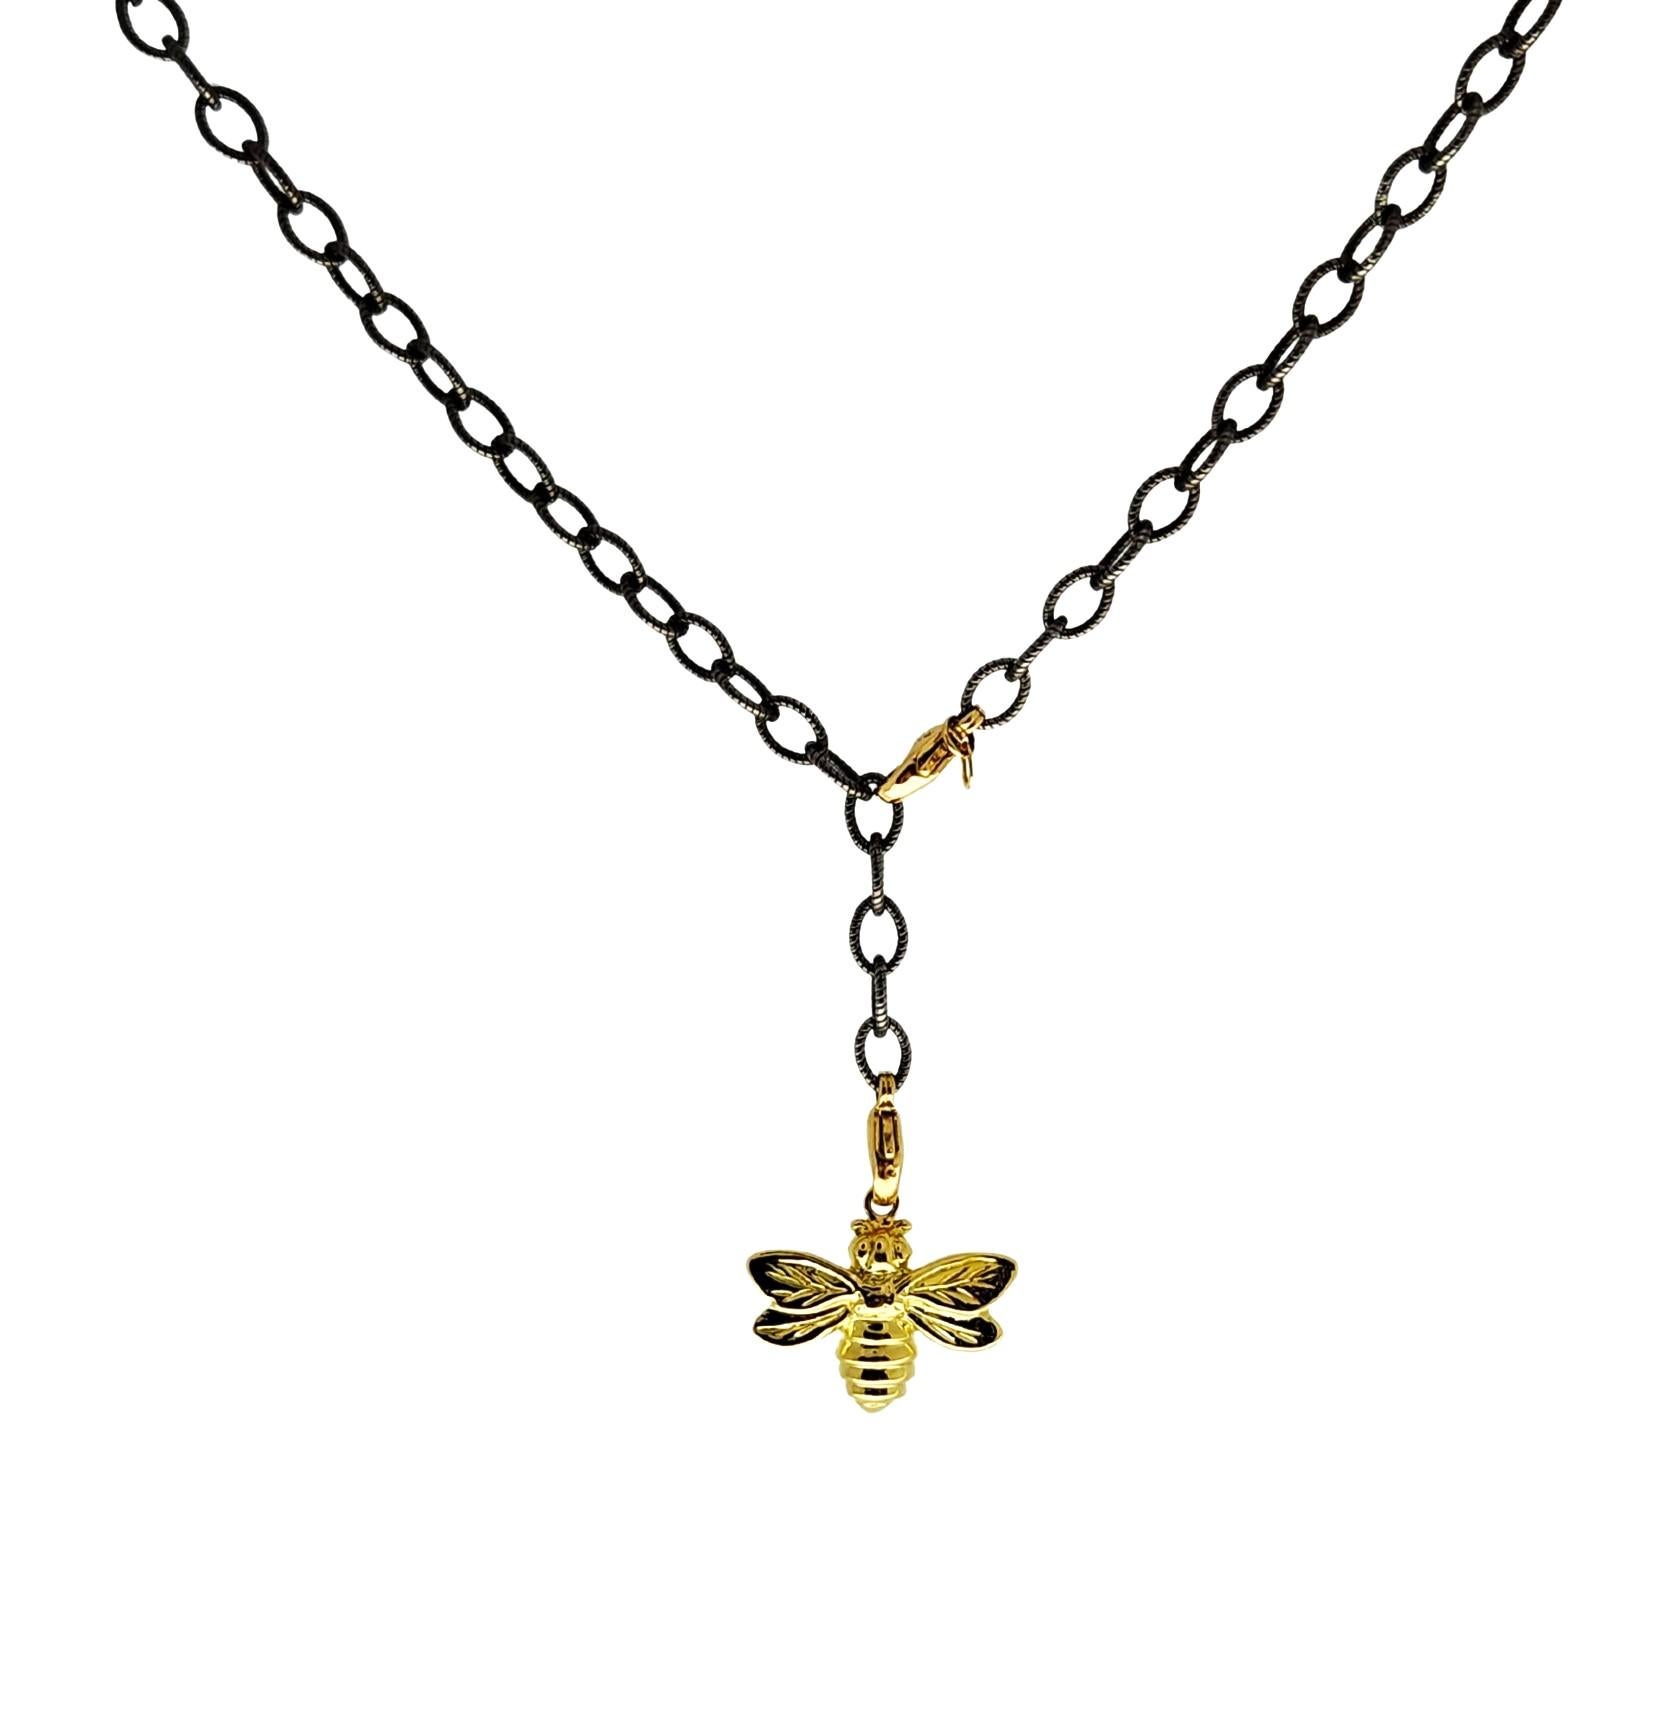 Modern Busy Bee Lariat Necklace in 18K Gold on an Oxidized Silver Chain with Lobsters For Sale